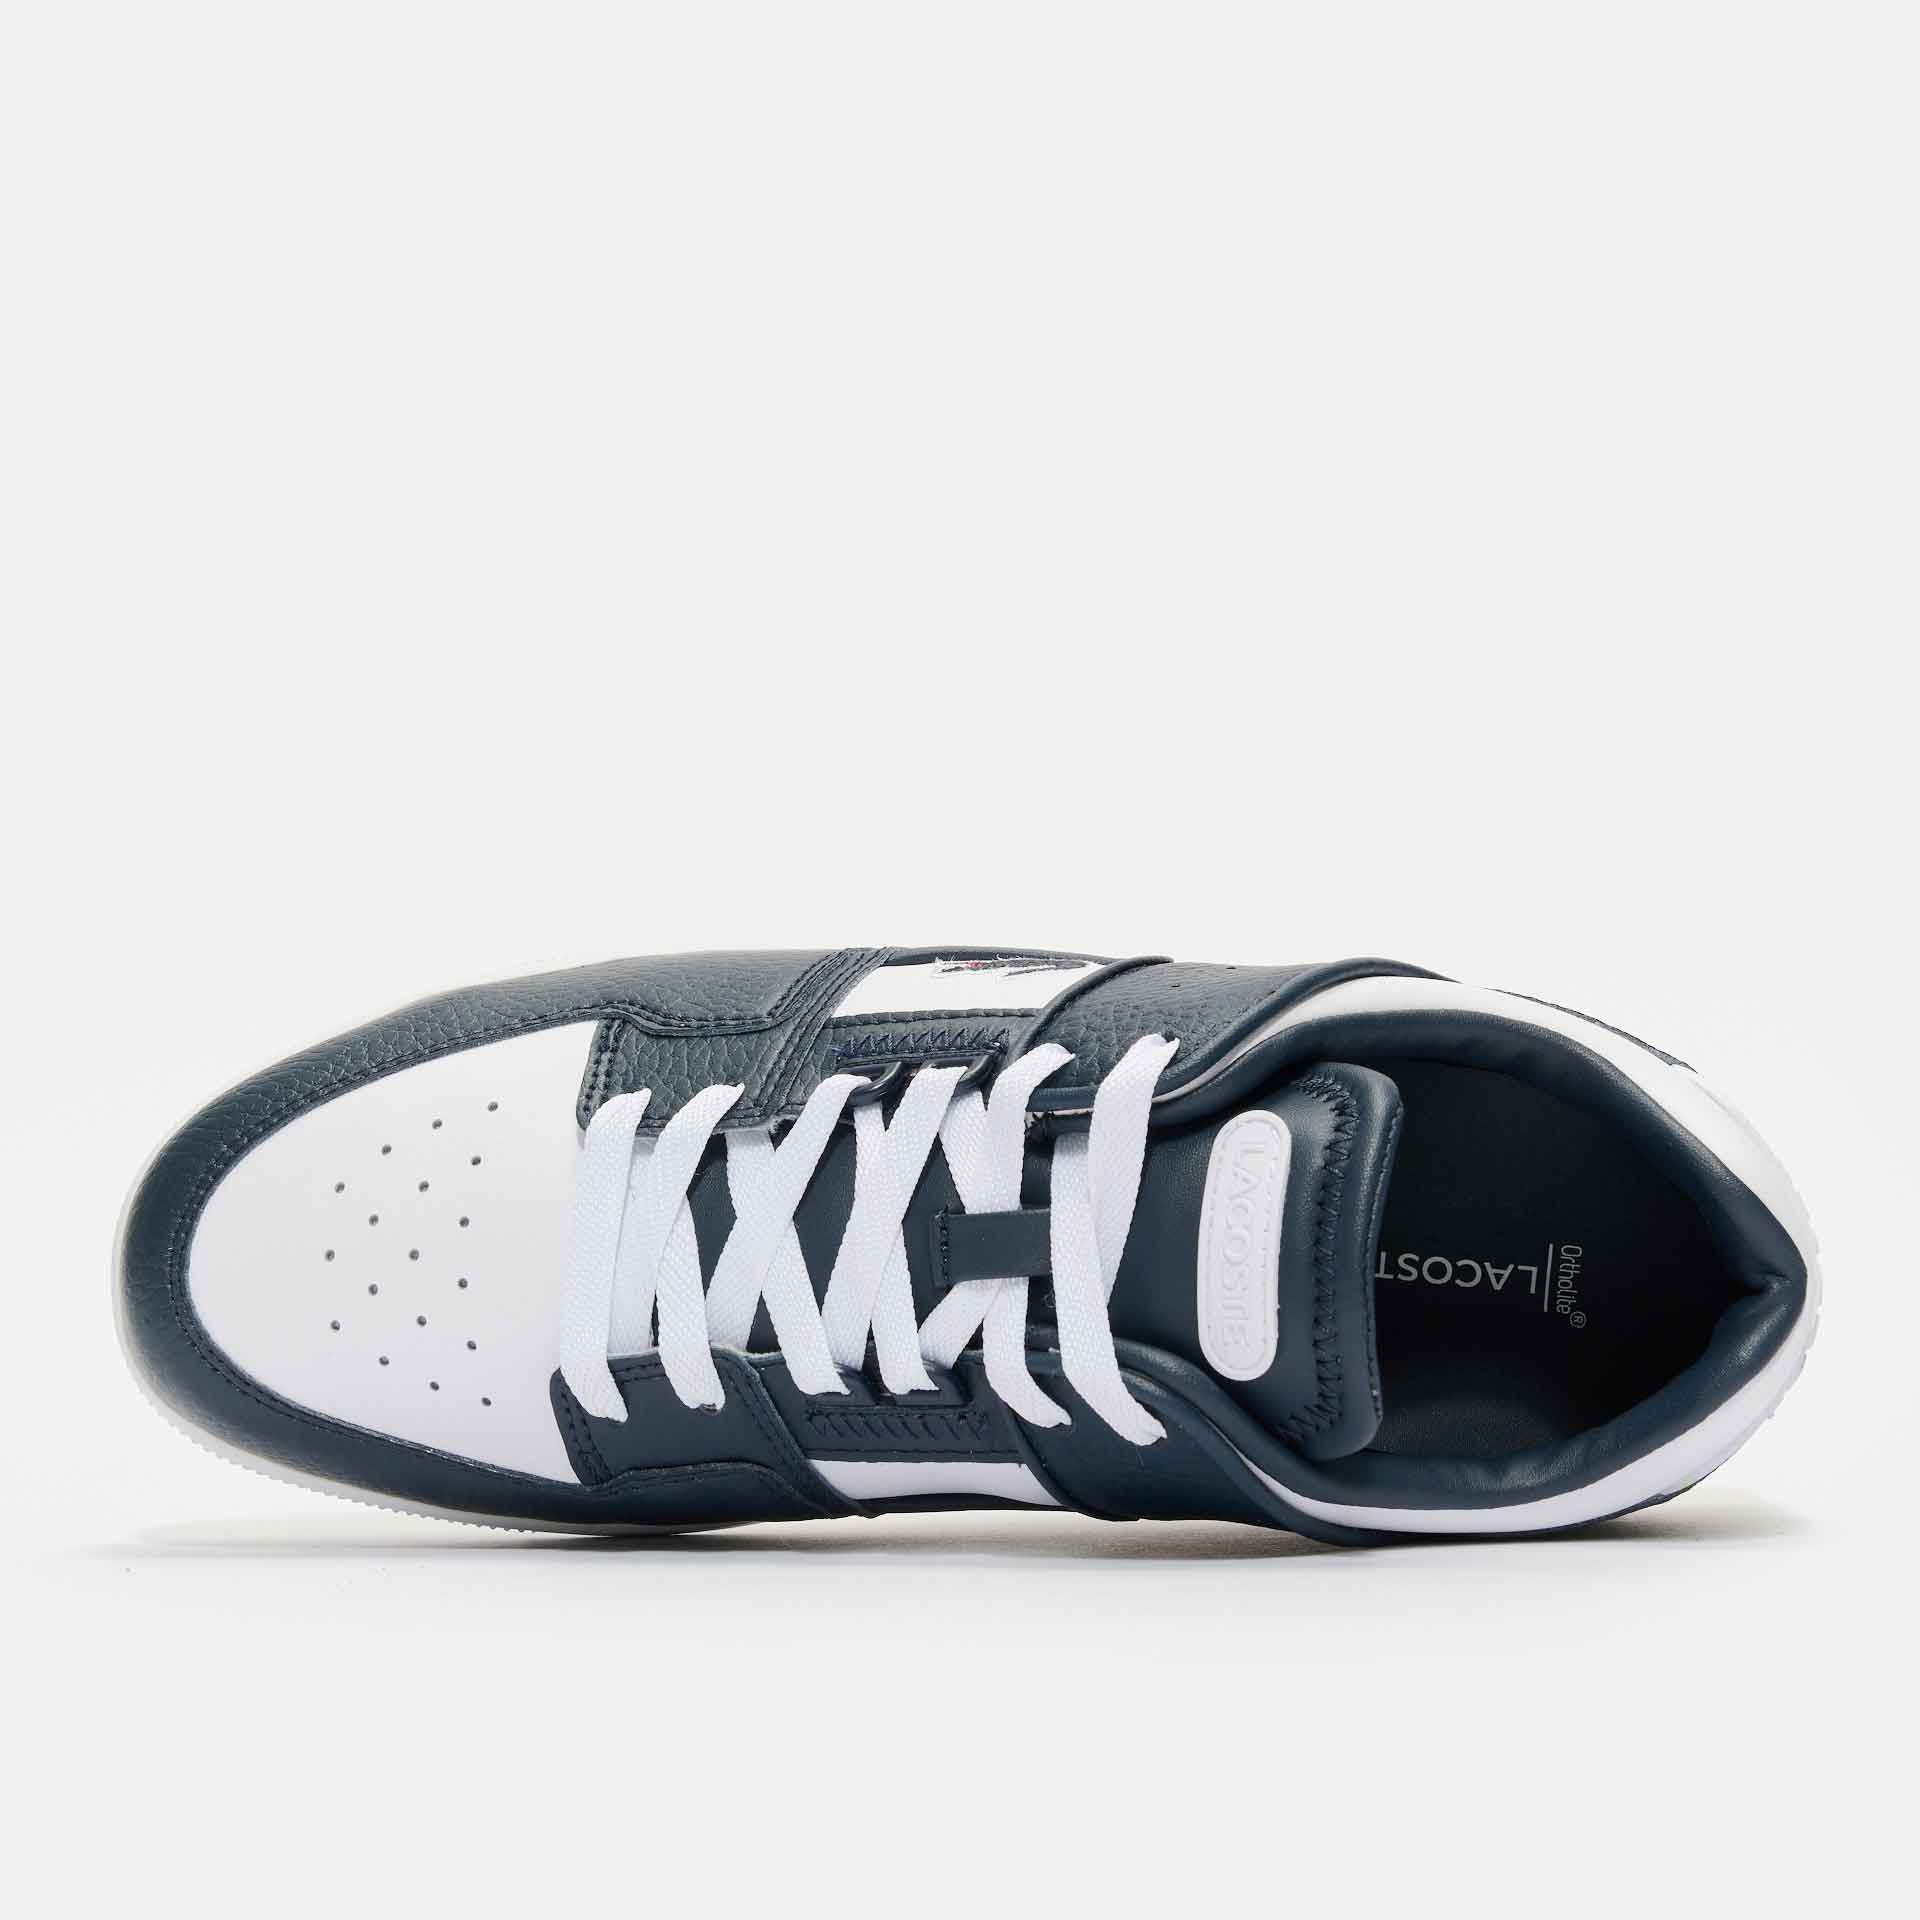 Lacoste Court-Cage 1121 Sneaker White/Navy